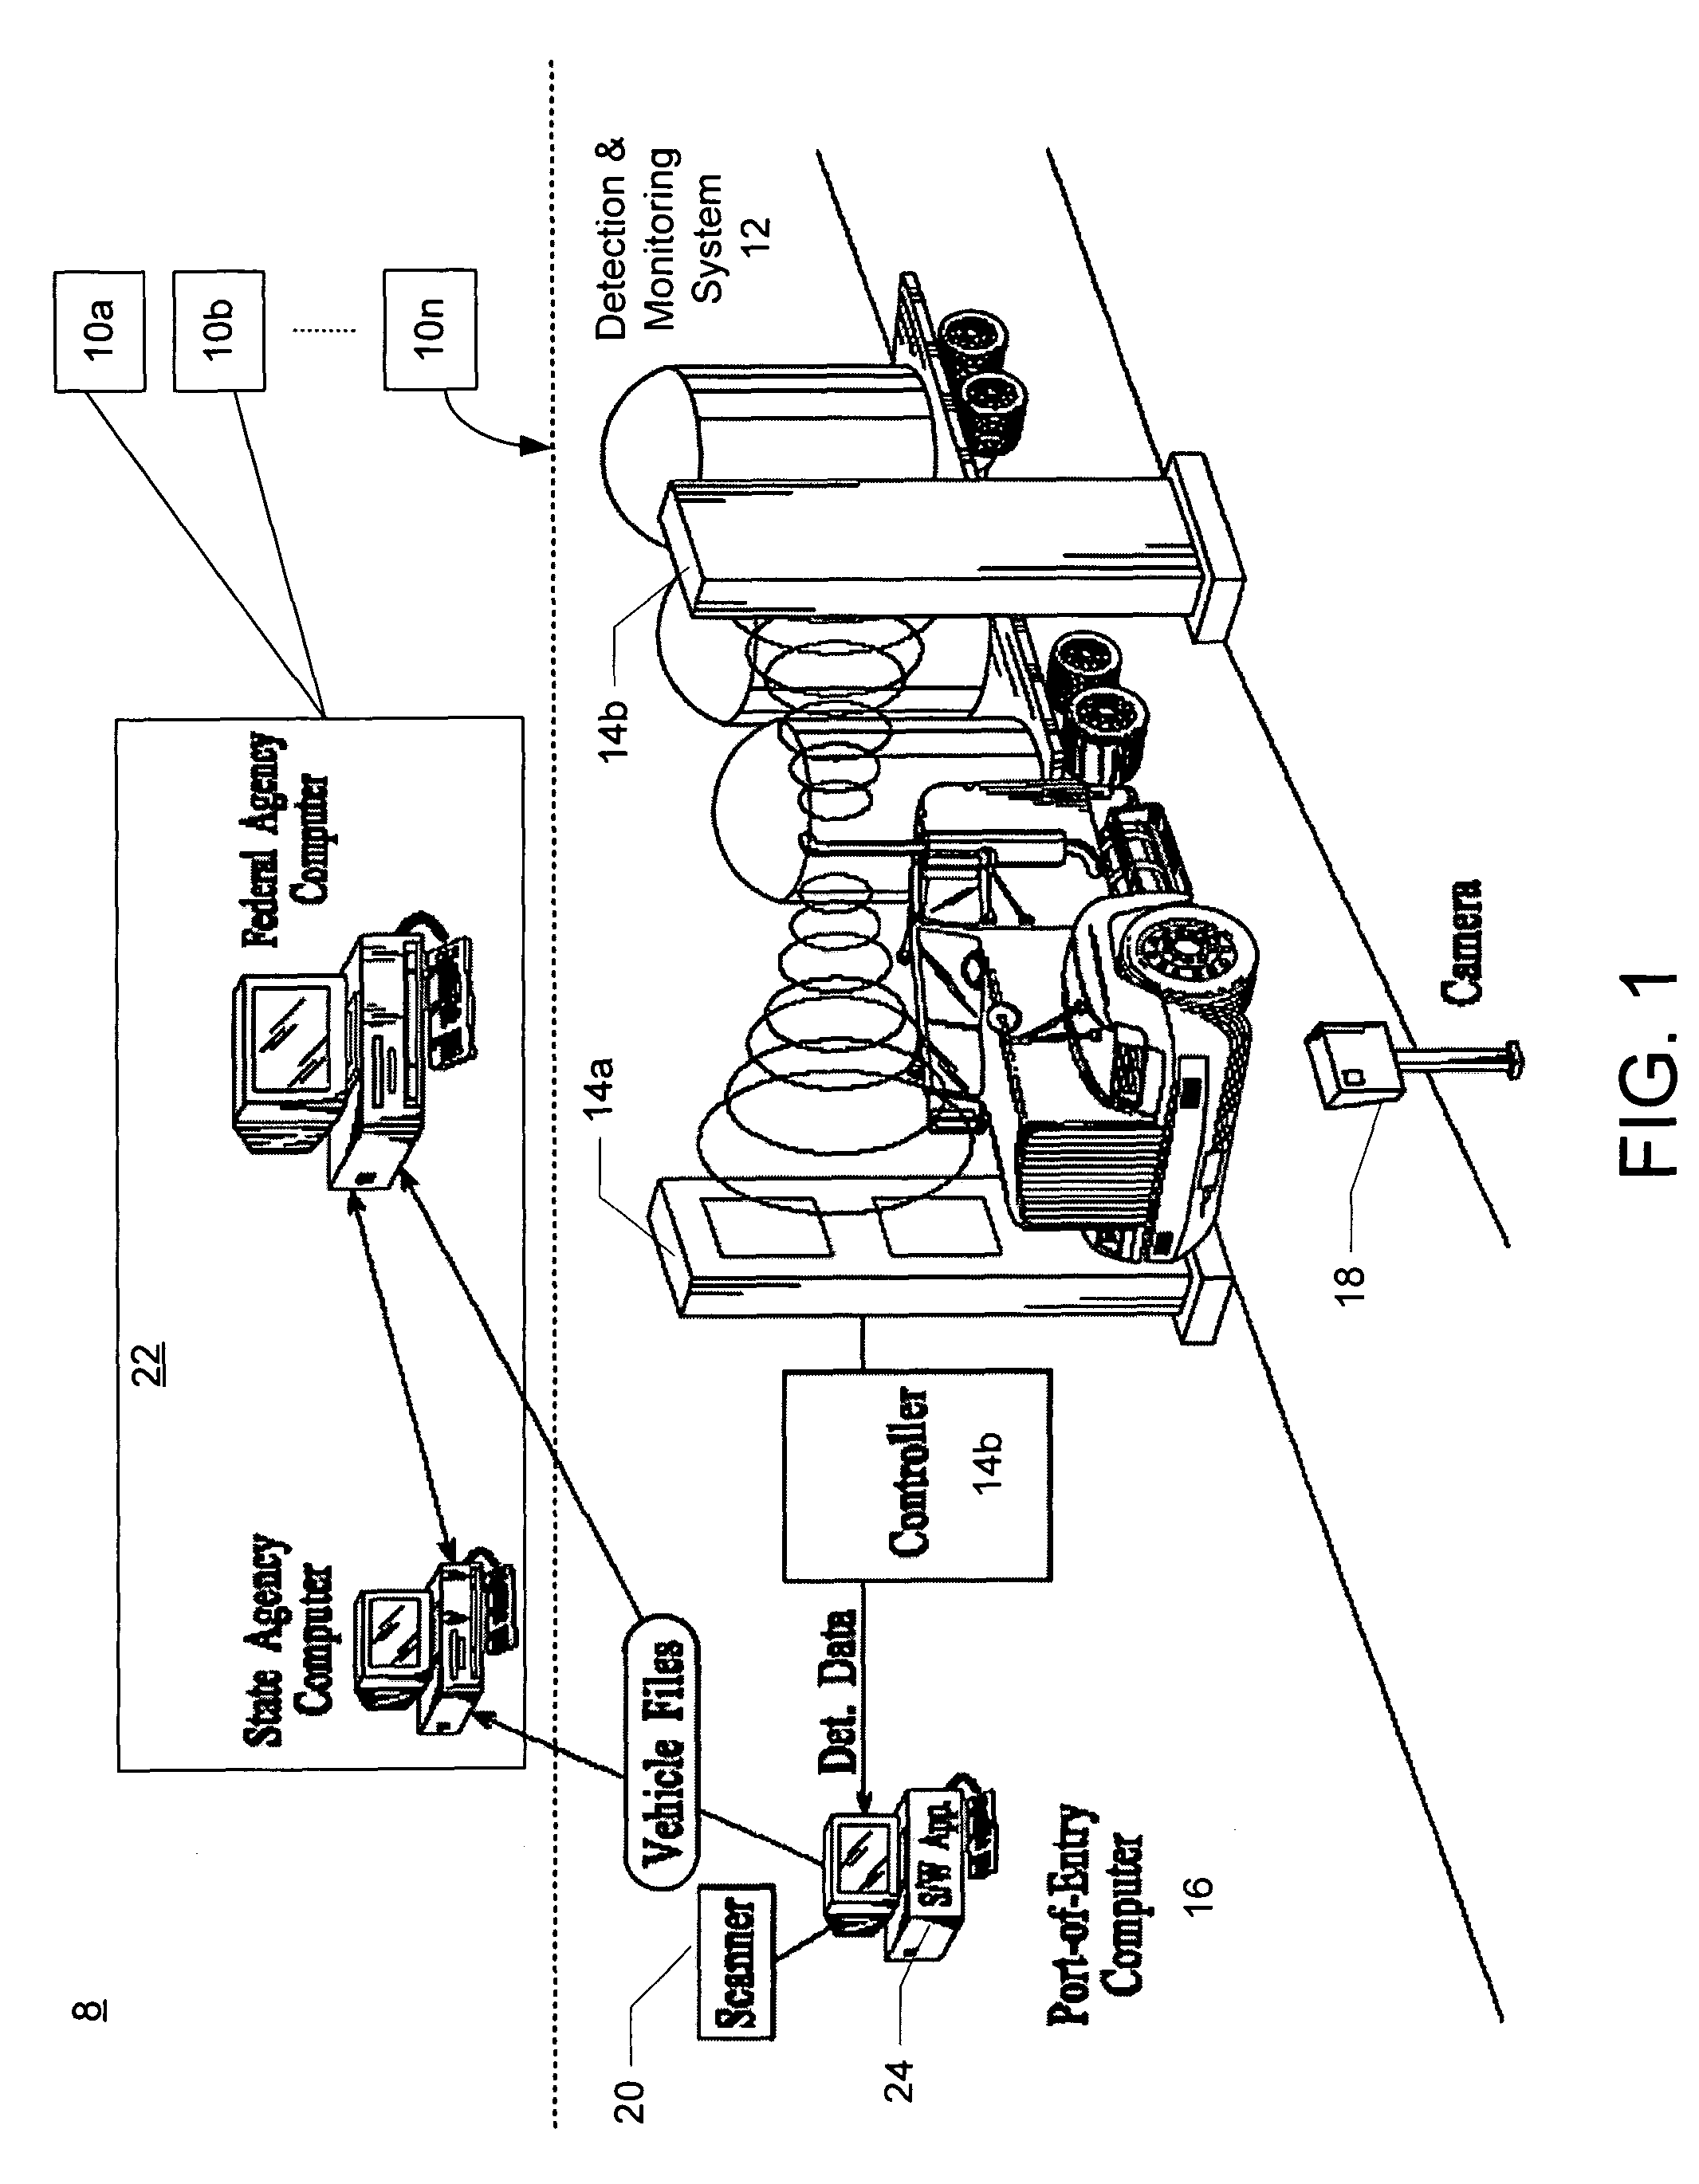 Integrated detection and monitoring system